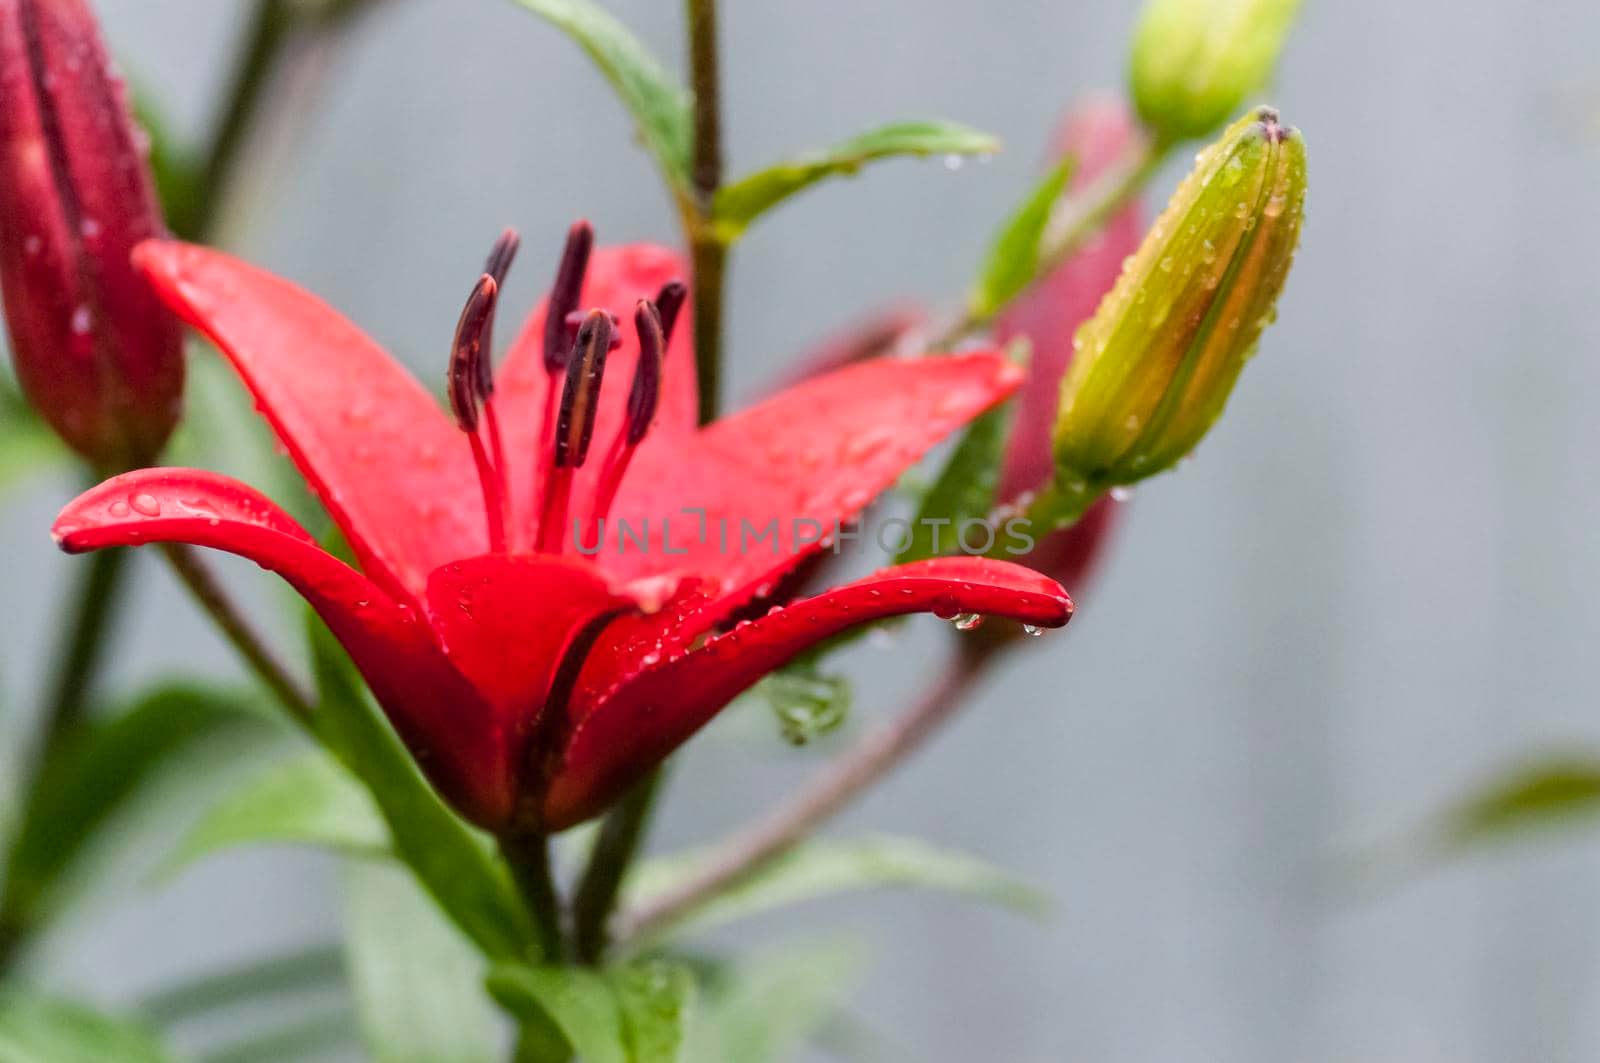 raindrops on the red petals of the Lily, a narrow focus area